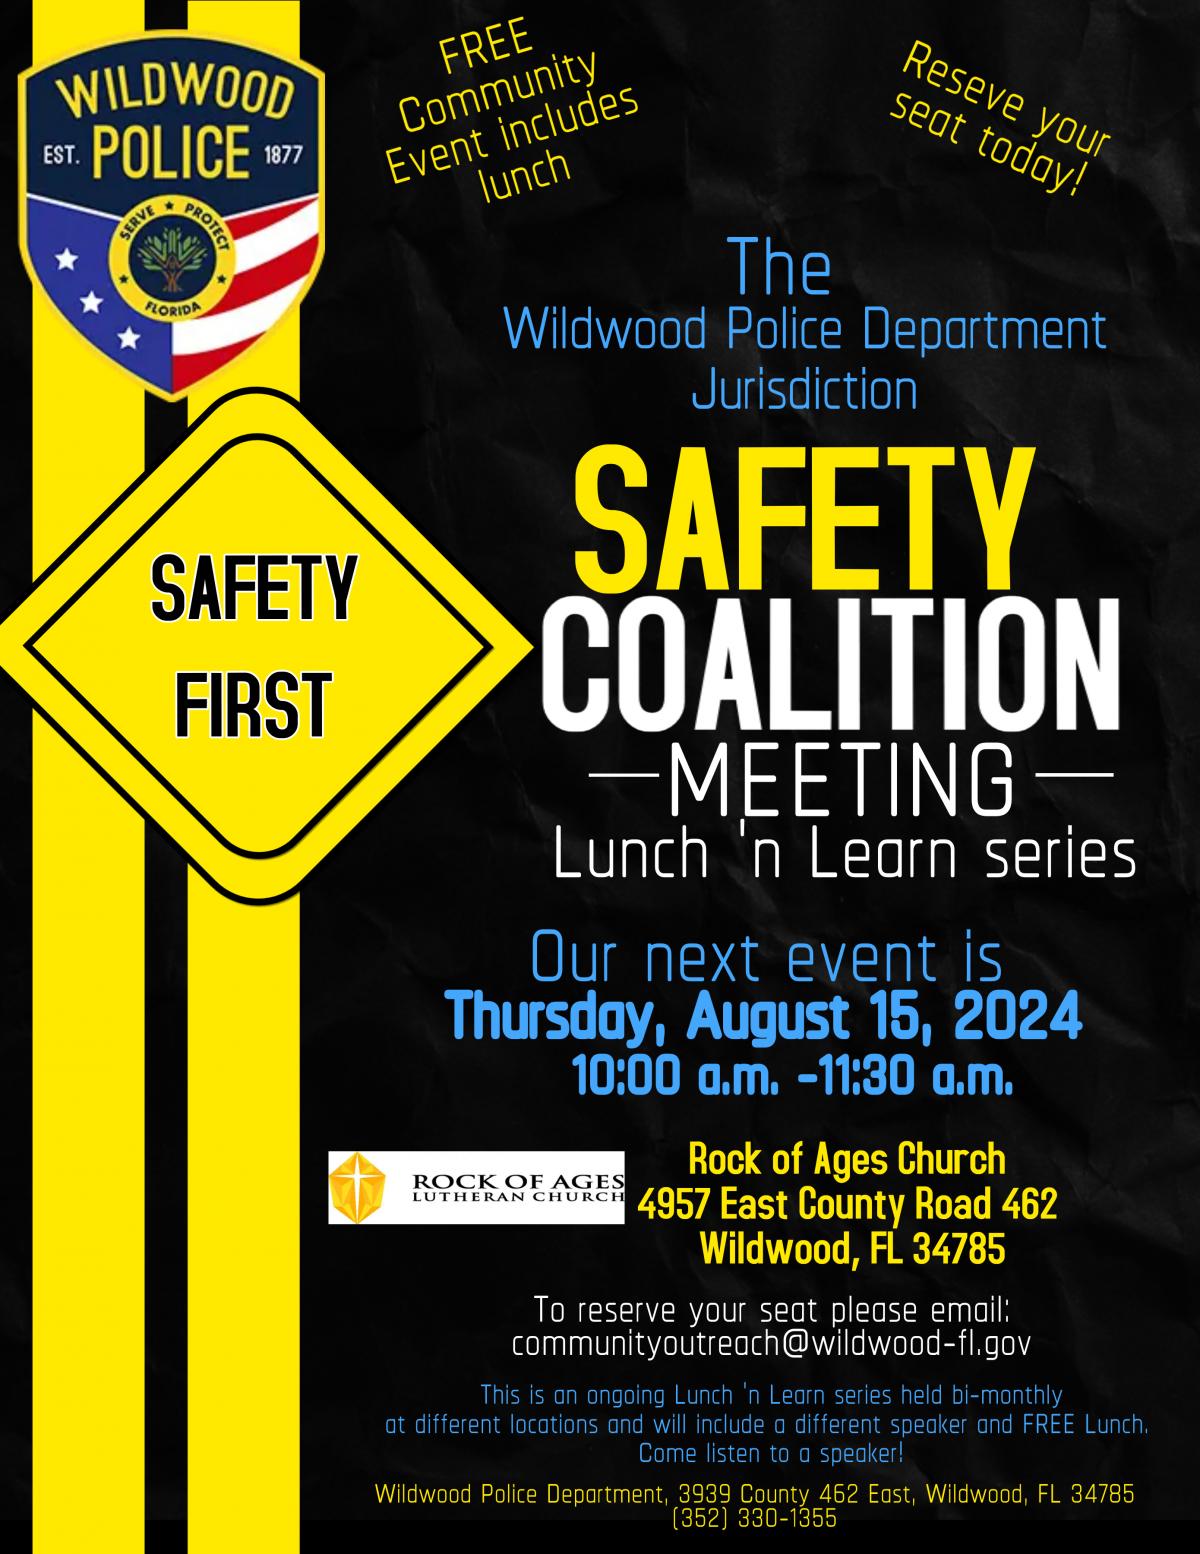 Wildwood Police Department "Safety Coalition Meeting" 10:00am - 11:30am, Rock of Ages Church 4957 East County Road 462